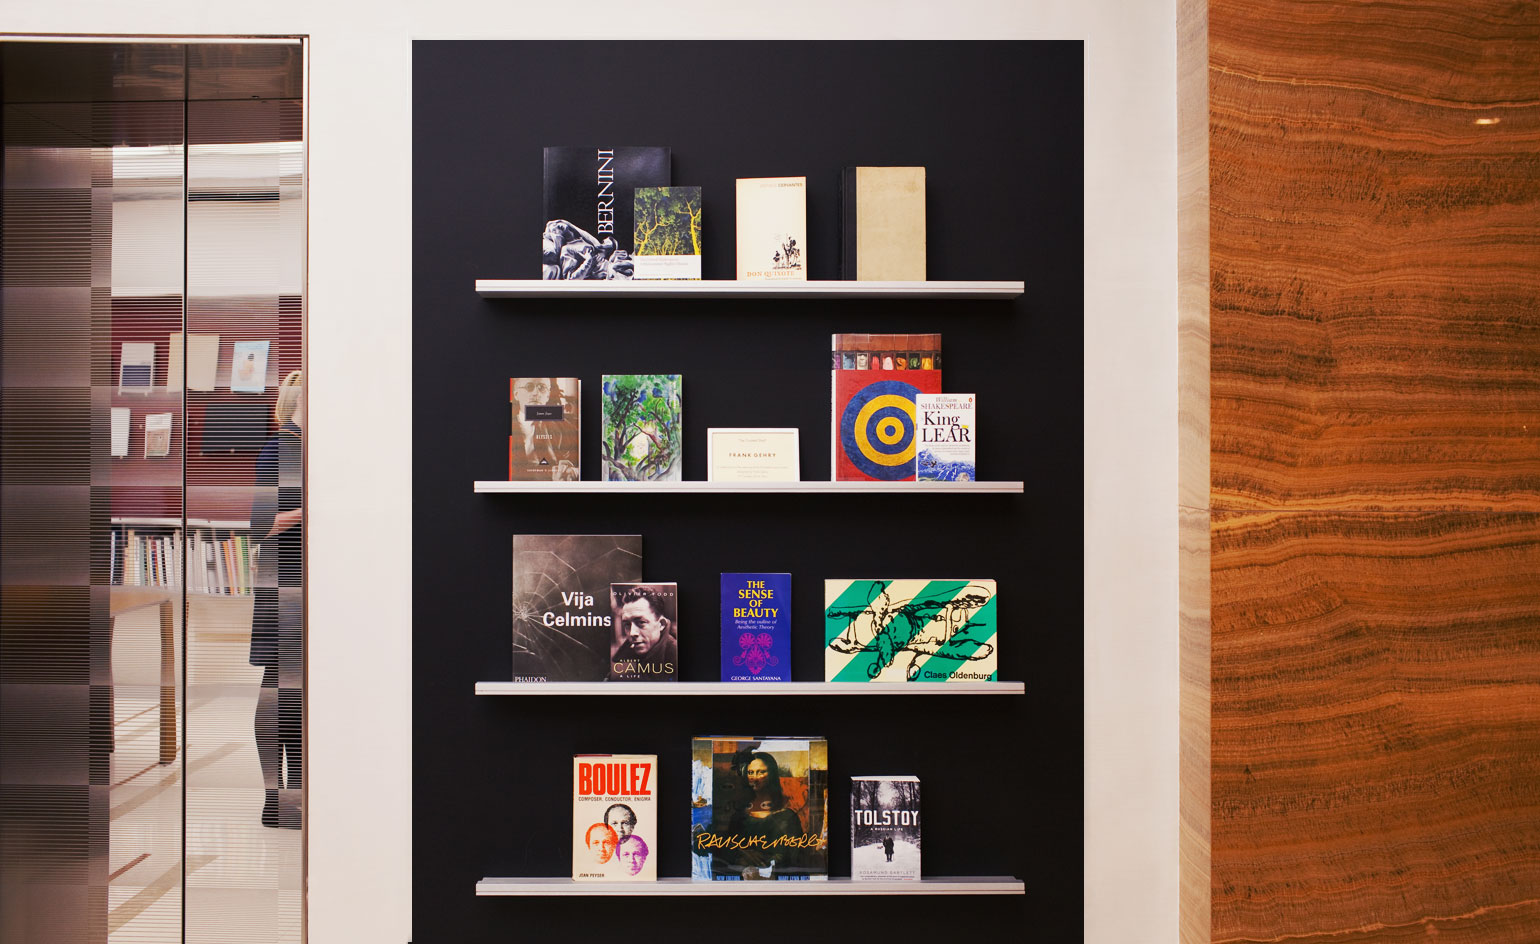 Frank Gehry has selected personal favorites for his 'Curated Bookshelf' at Louis Vuitton's London flagship. The shelf is located in the first-floor librarie.